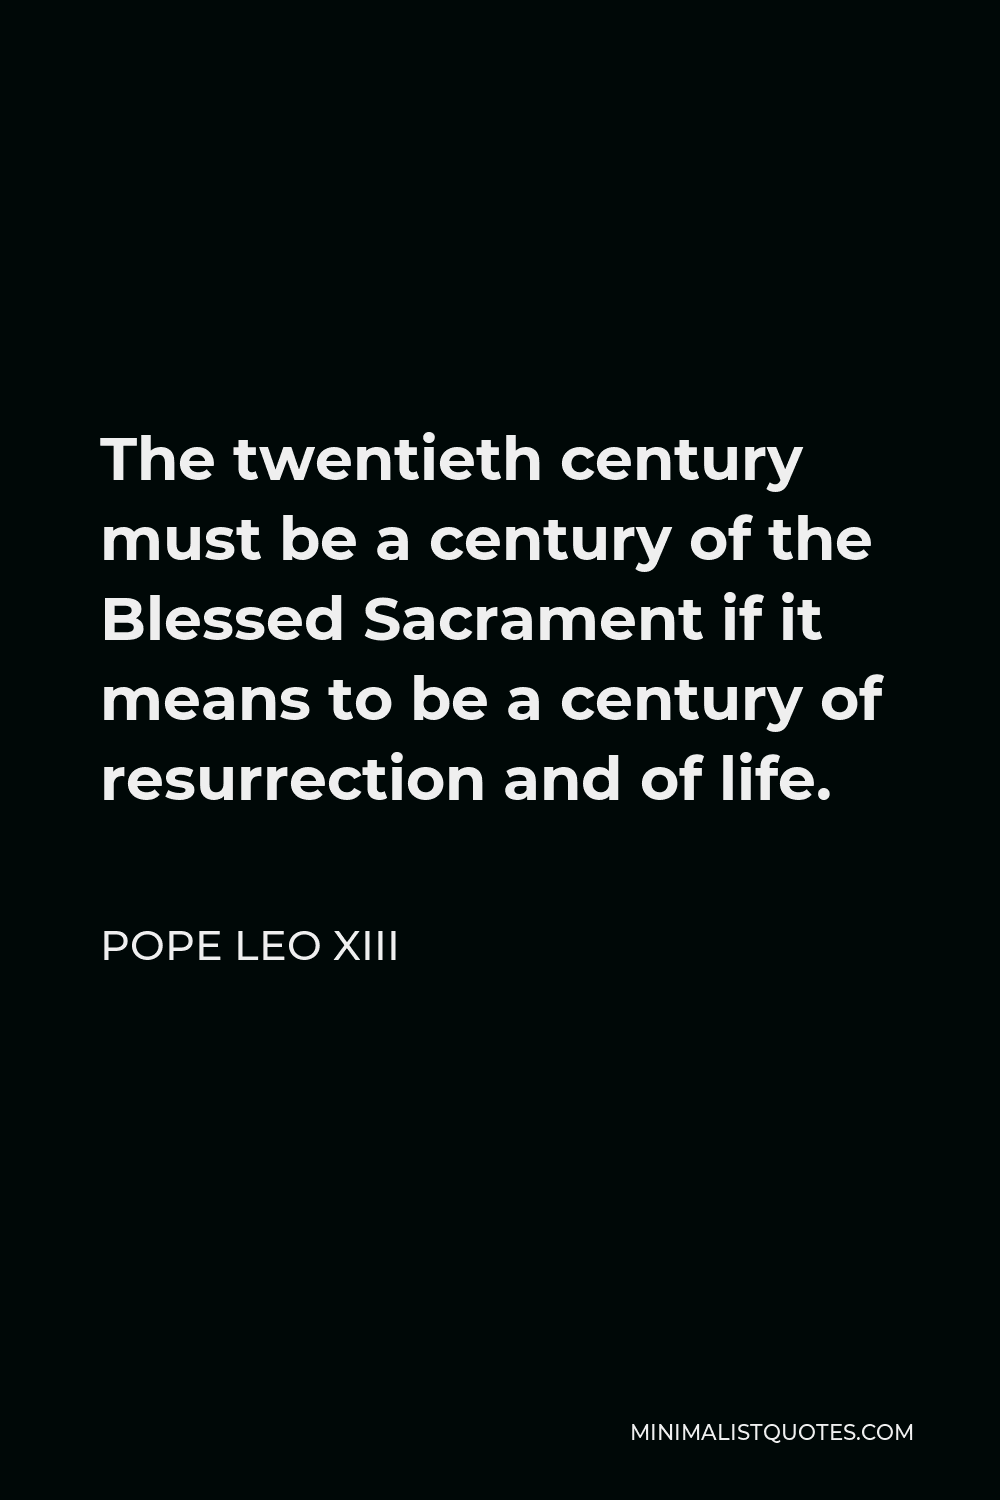 Pope Leo XIII Quote - The twentieth century must be a century of the Blessed Sacrament if it means to be a century of resurrection and of life.